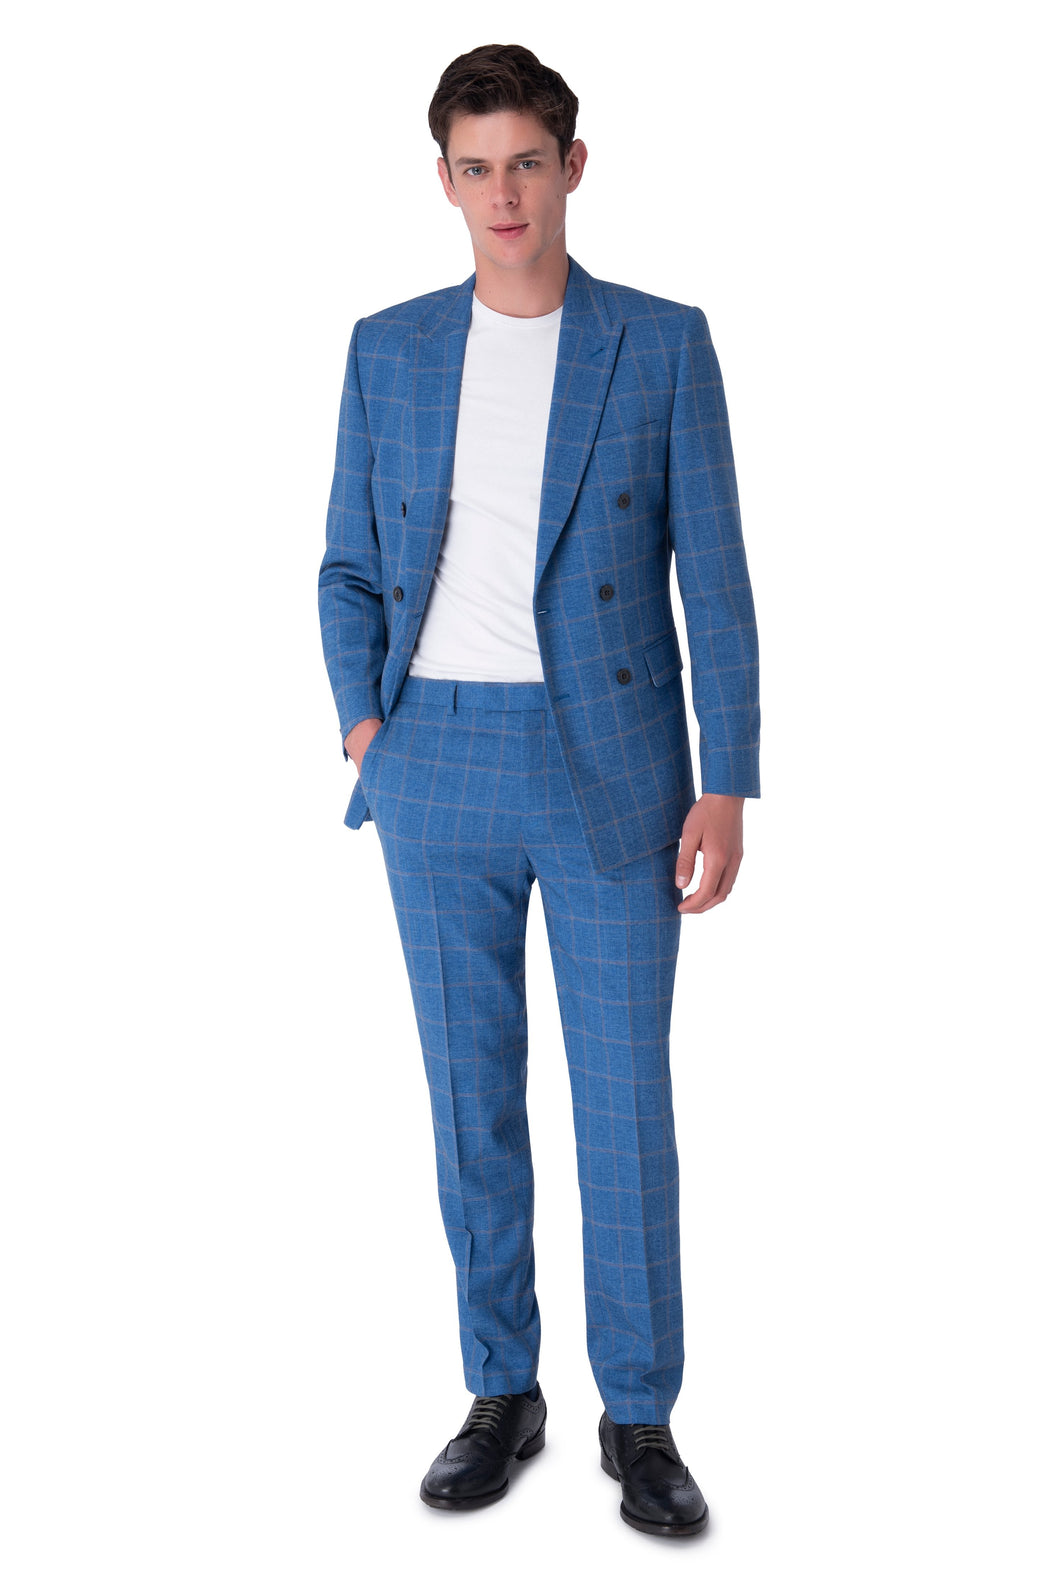 William Blue Check Double Breasted Suit RRP £239